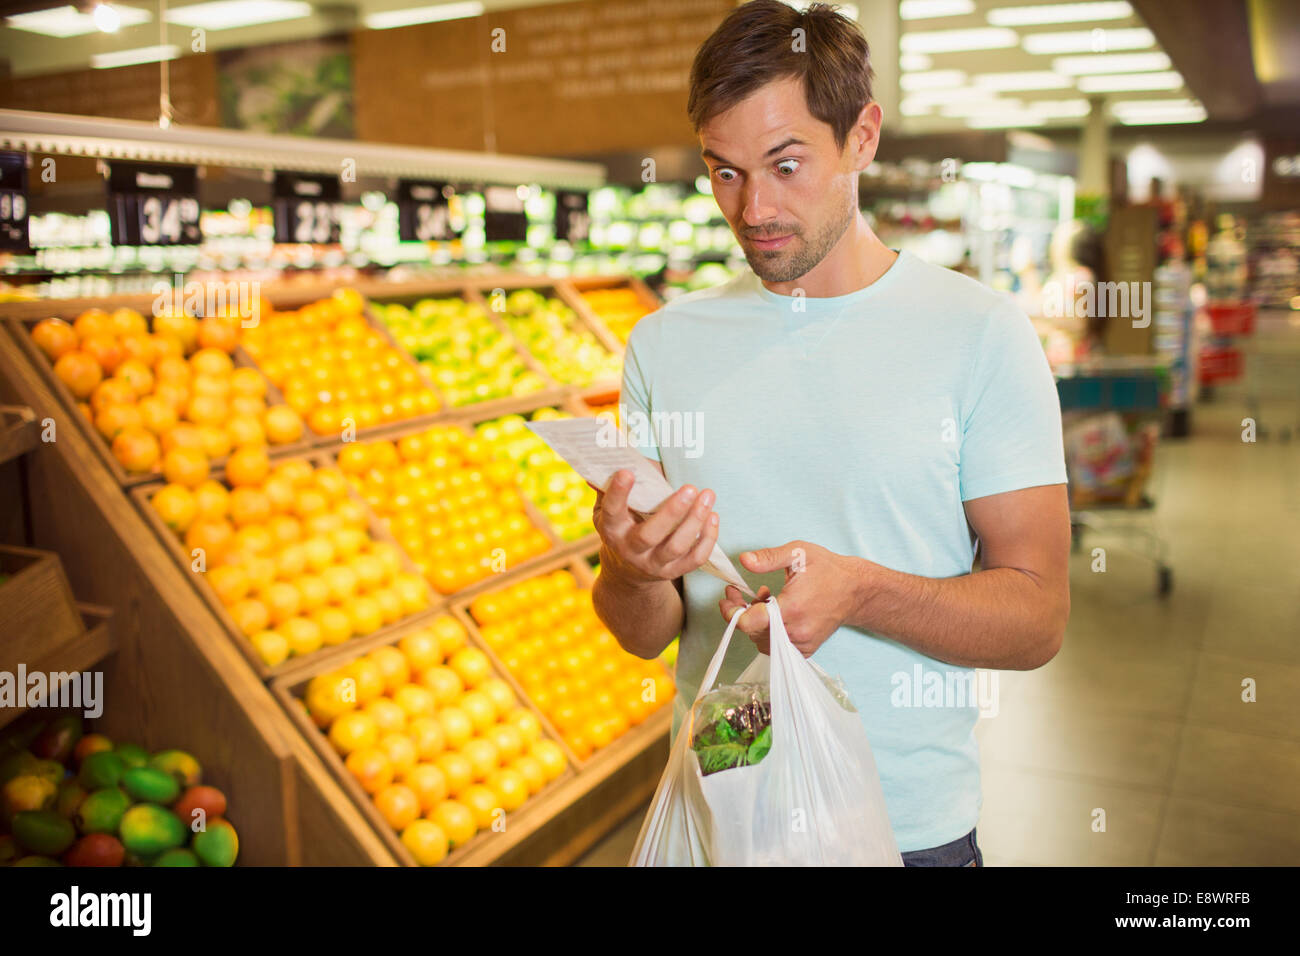 https://c8.alamy.com/comp/E8WRFB/surprised-man-reading-receipt-in-grocery-store-E8WRFB.jpg